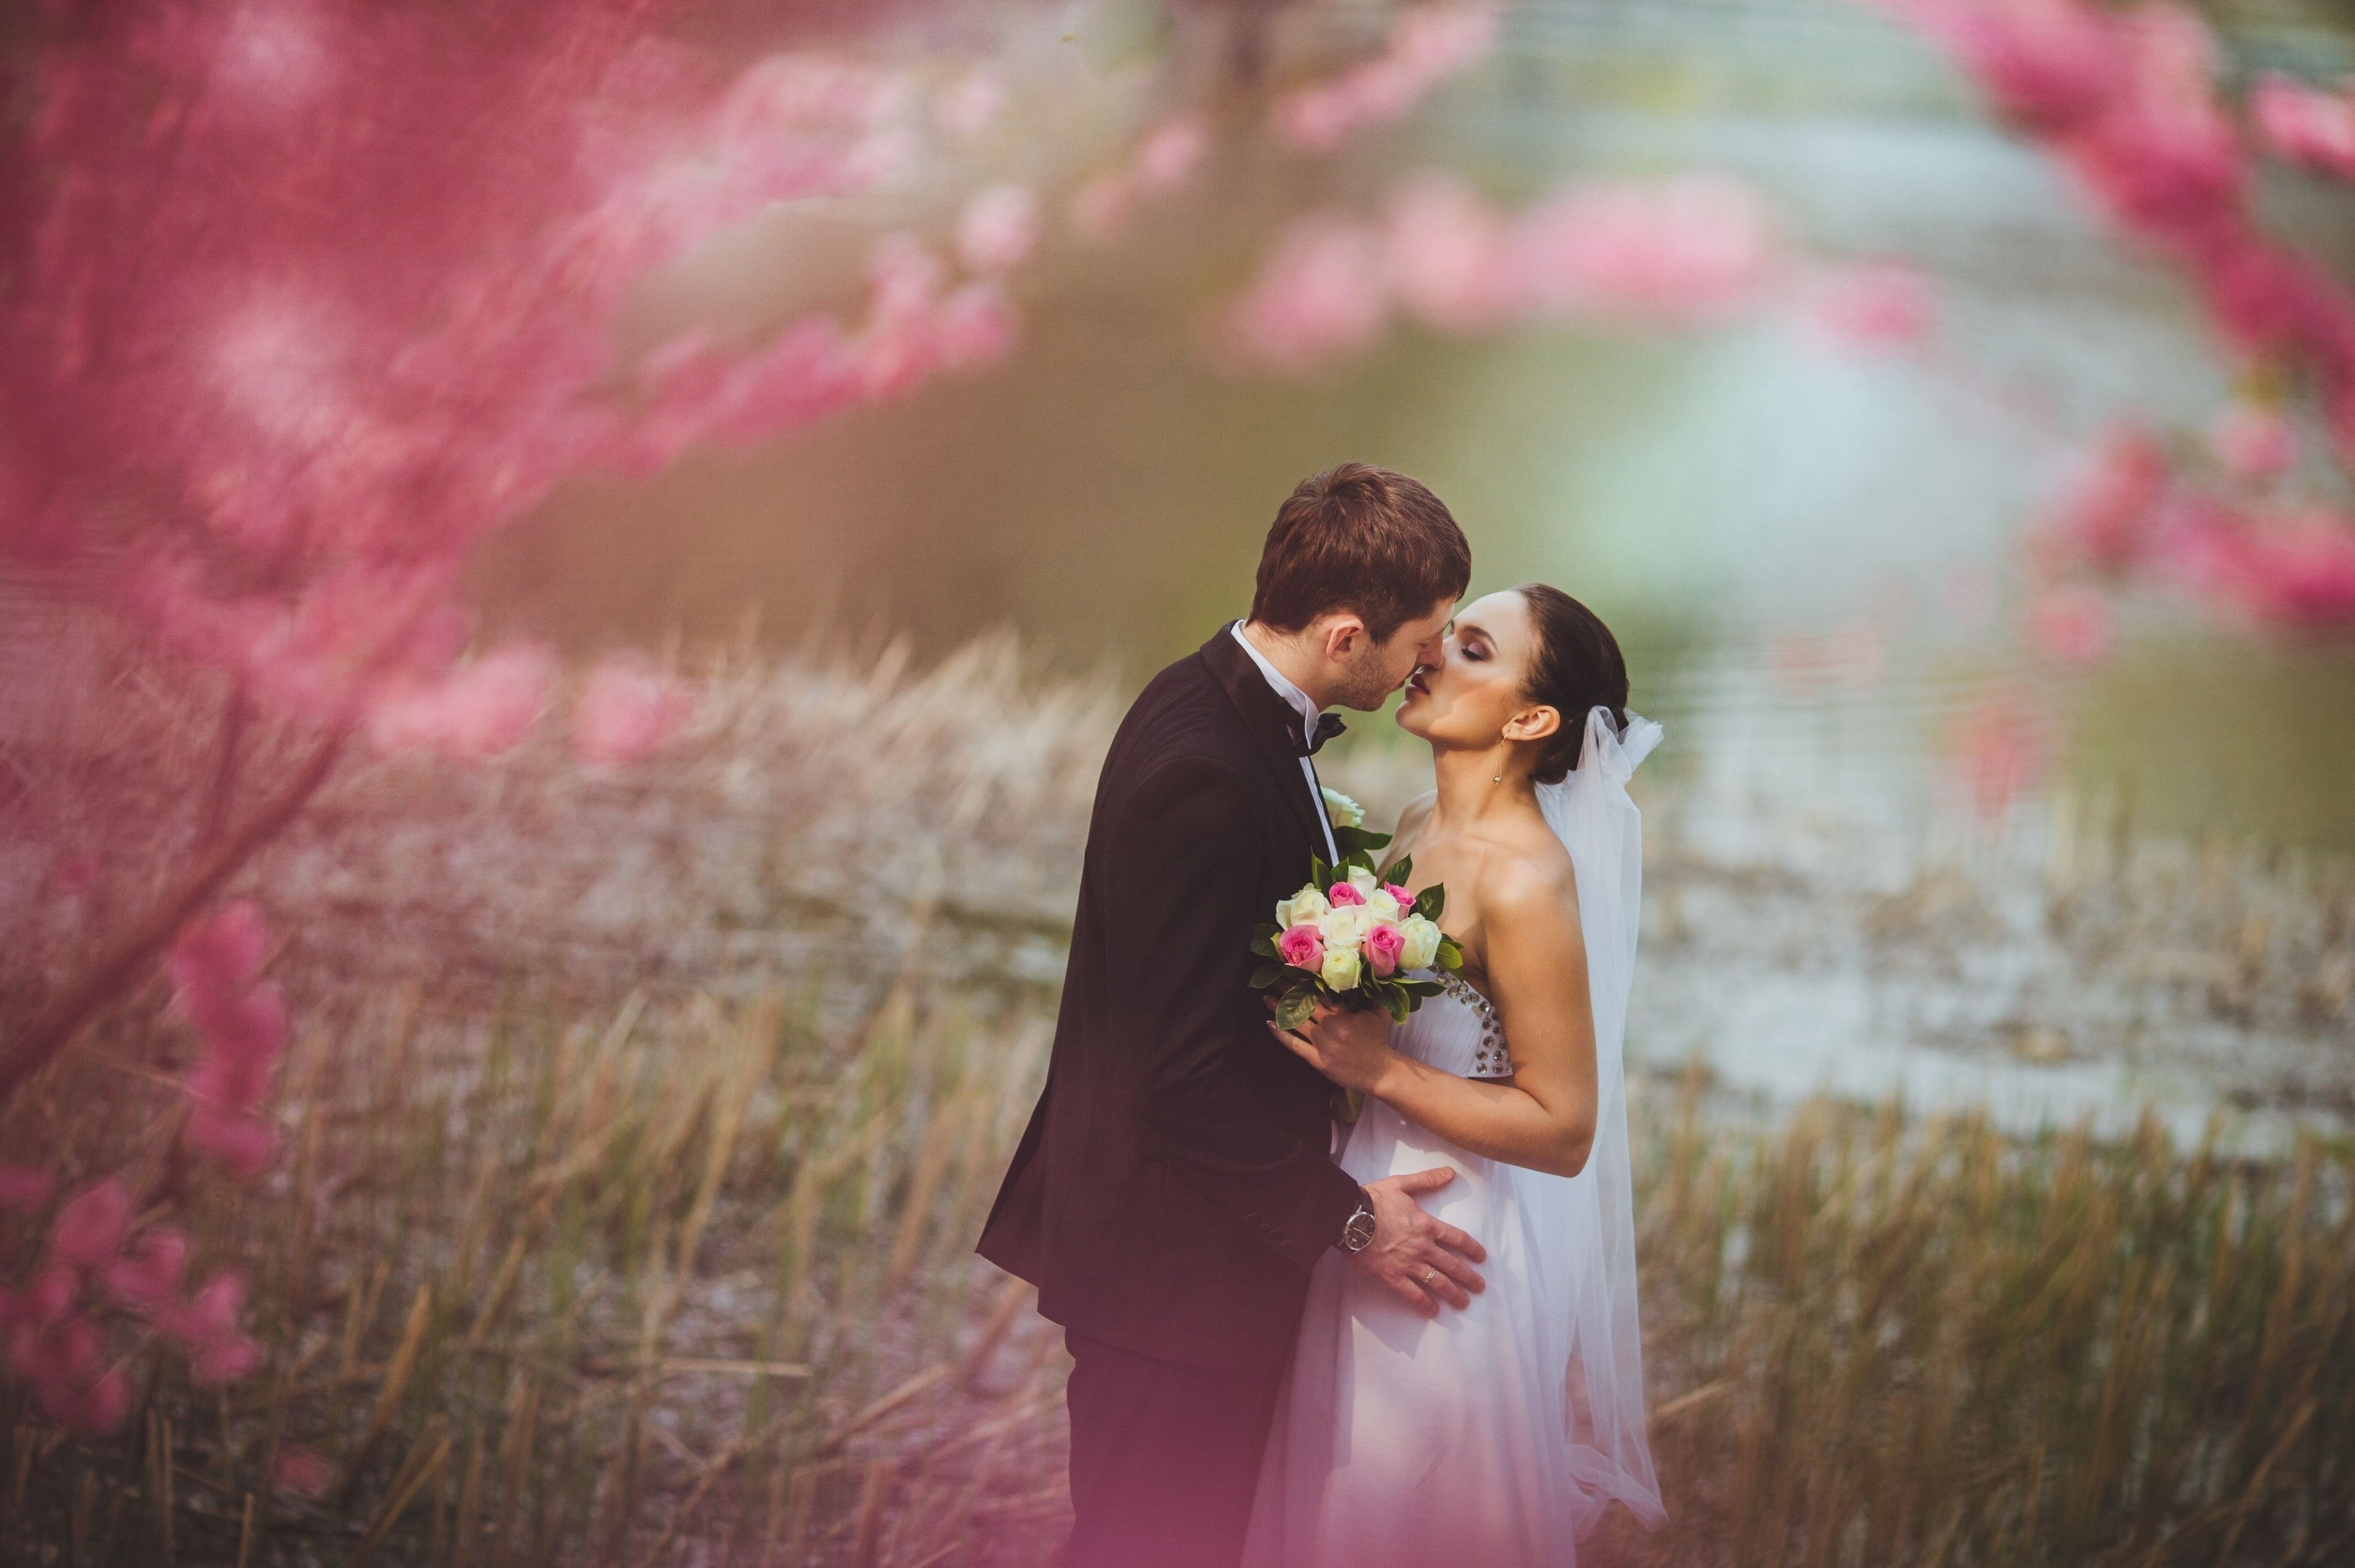 Download Wallpaper of love and kiss HD Wallpaper of love and kiss Download Download Wallpaper of lo. Wedding couples, Lovely good morning image, Wedding